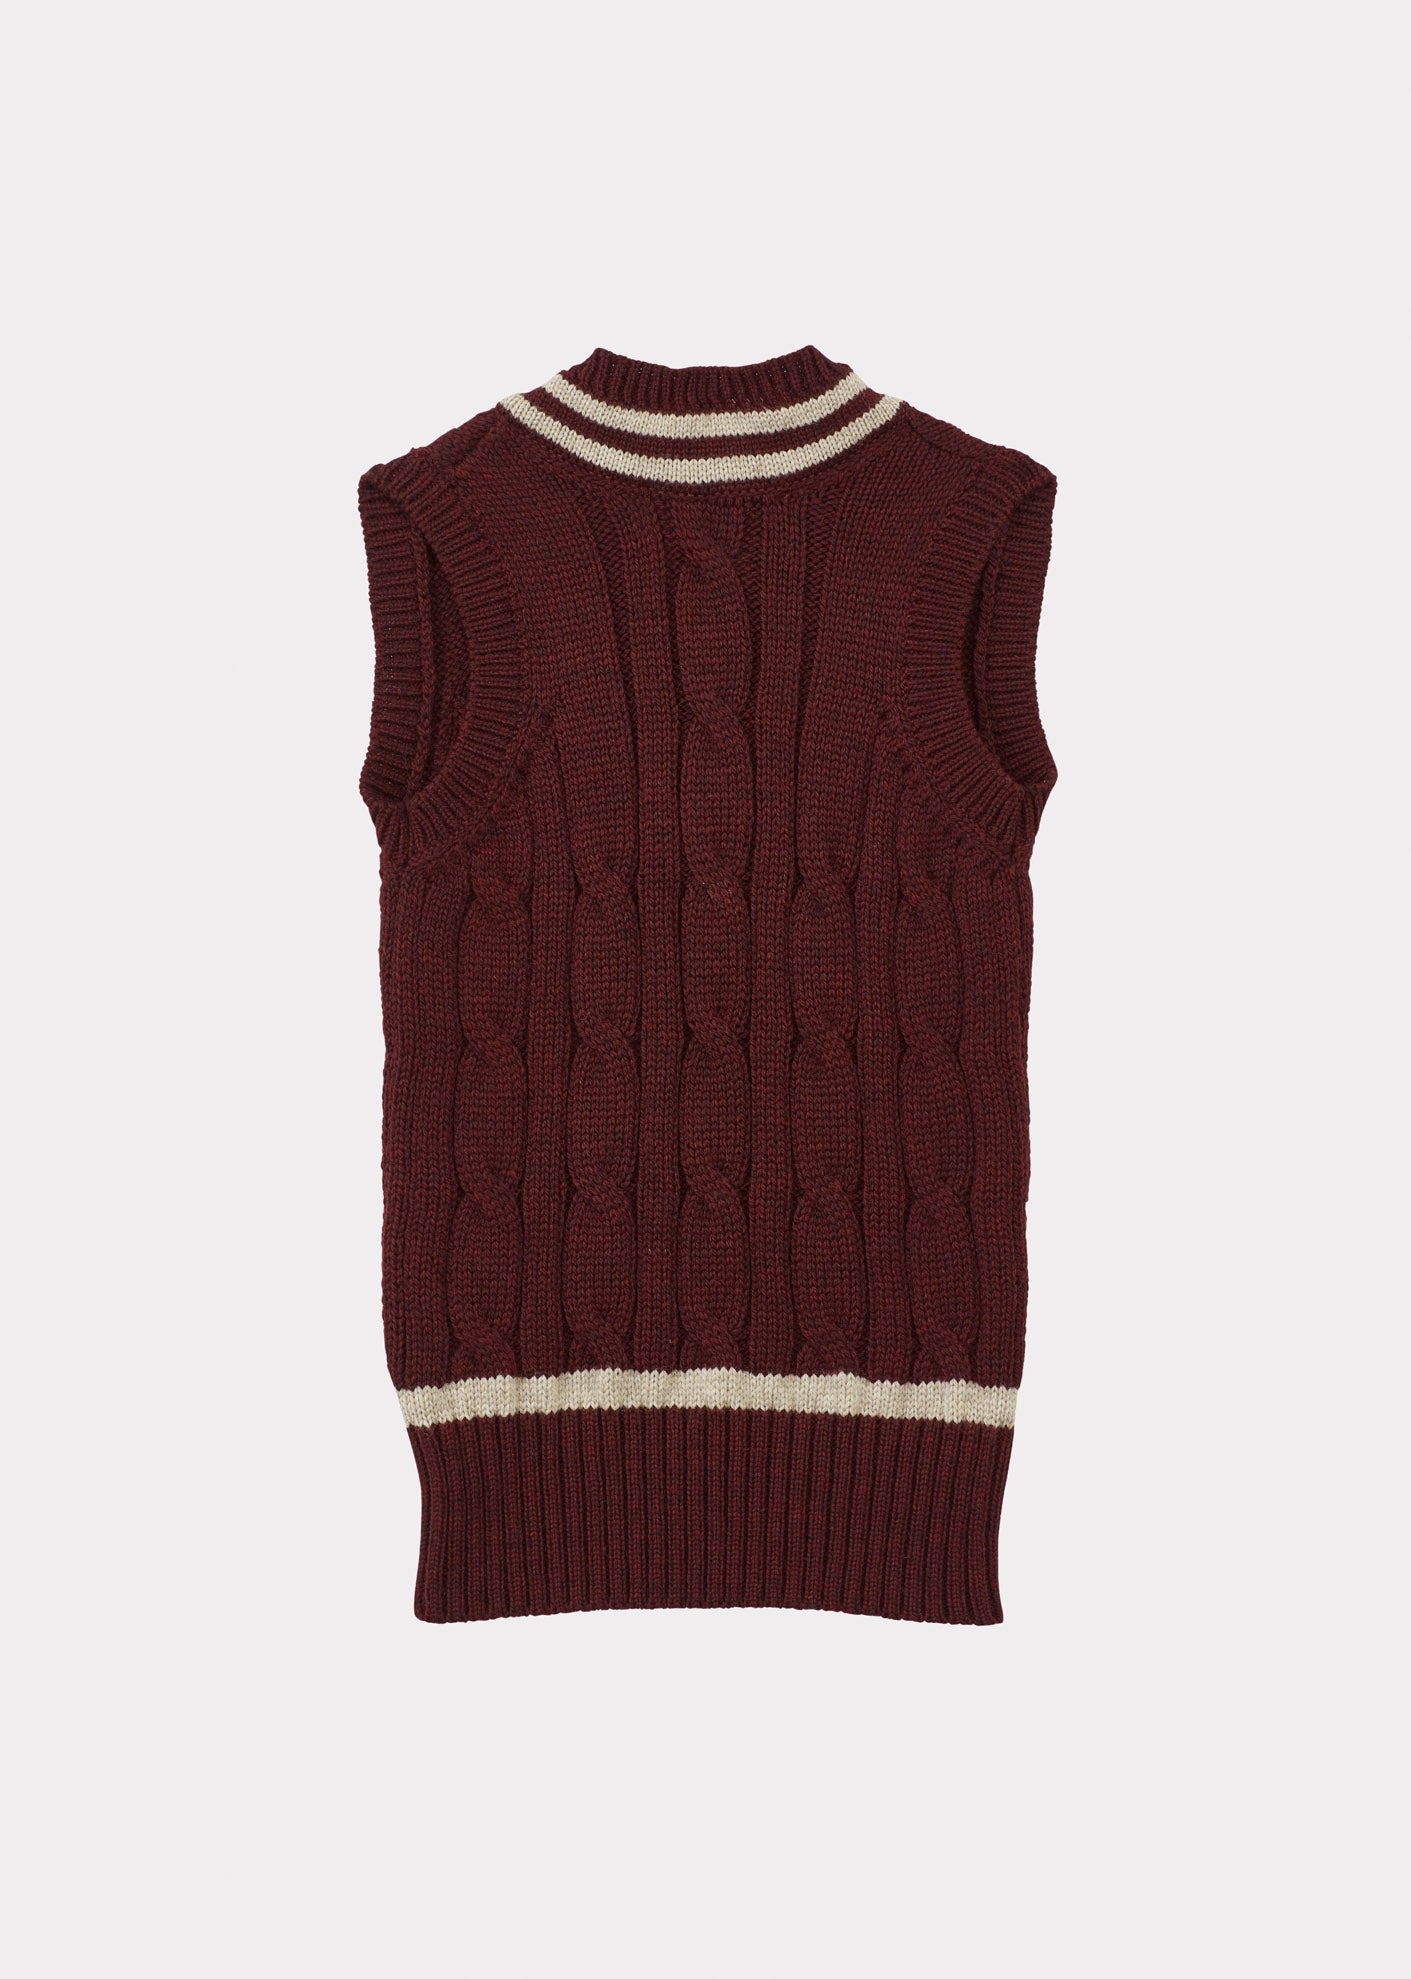 CARDIFF KNIT VEST WOMAN - BROWN 2